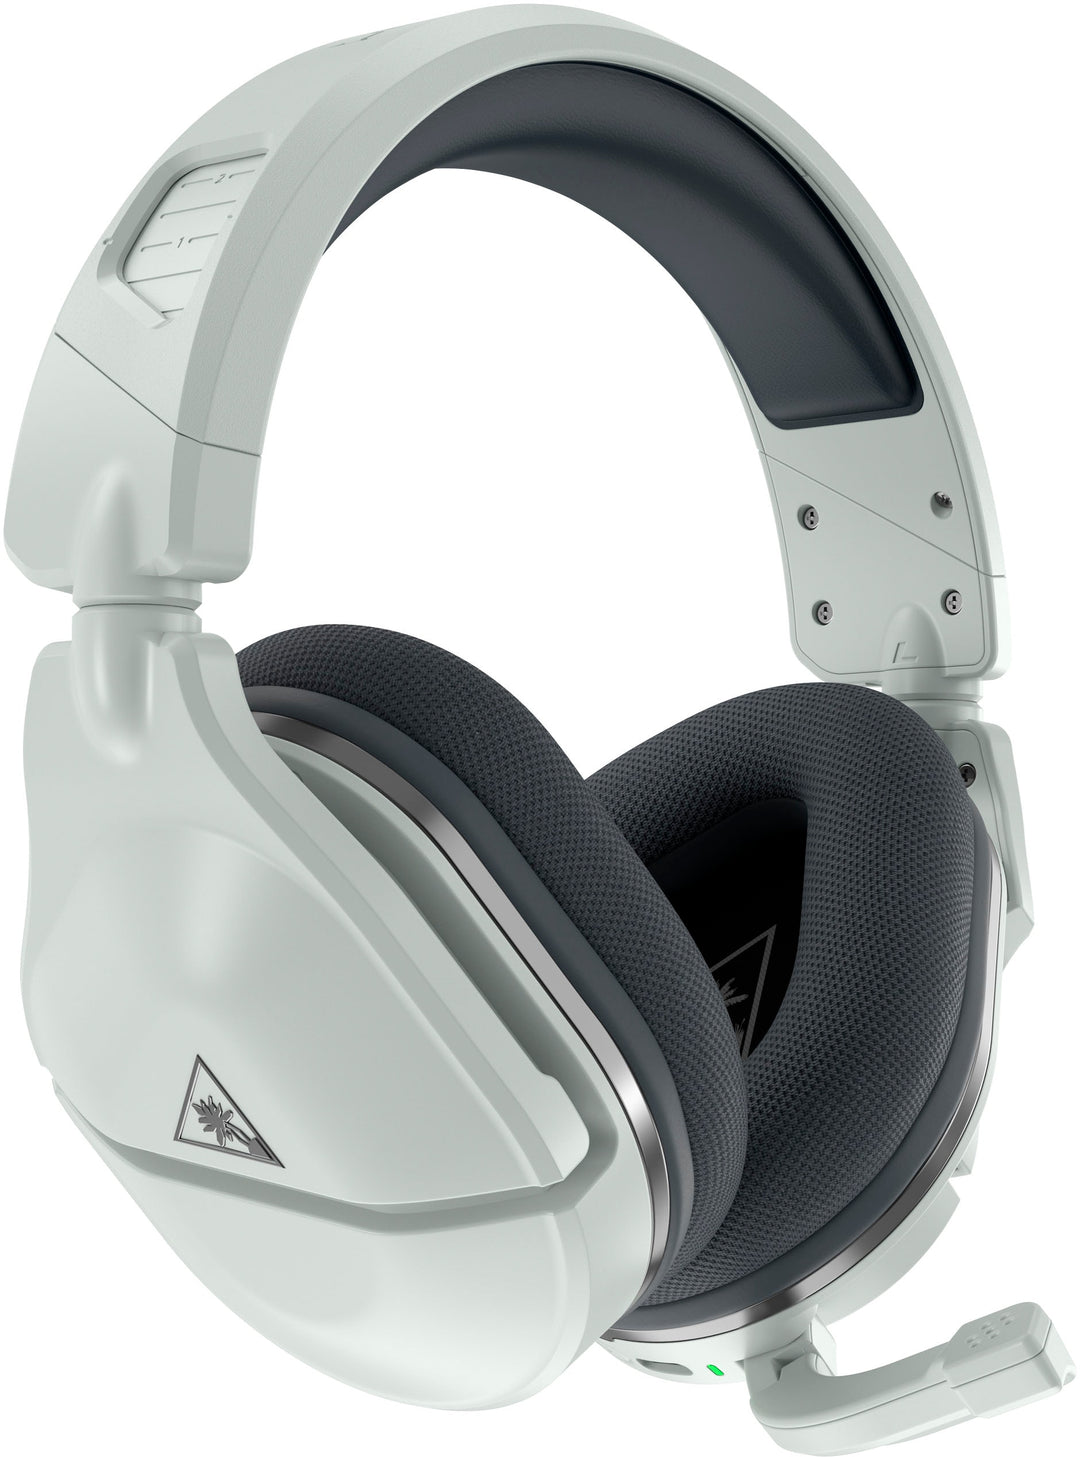 Turtle Beach - Stealth 600 Gen 2 USB Wireless Amplified Gaming Headset for Xbox Series X, Xbox Series S & Xbox One - 24 Hour Battery - White/Silver_2